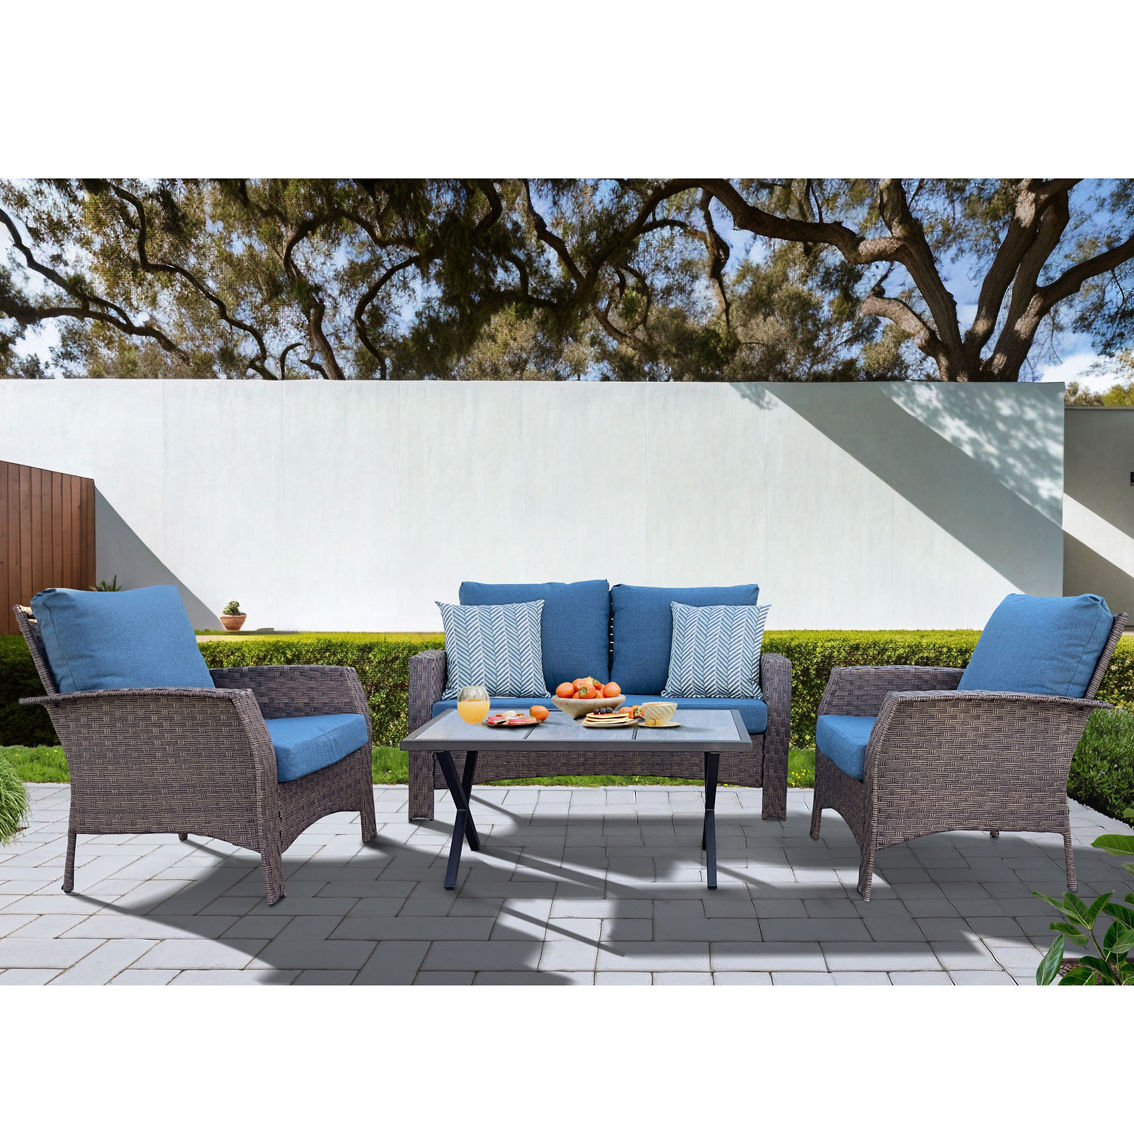 Home Creations Inc Garden View Deep Seating 4 pc. Set - Image 2 of 2